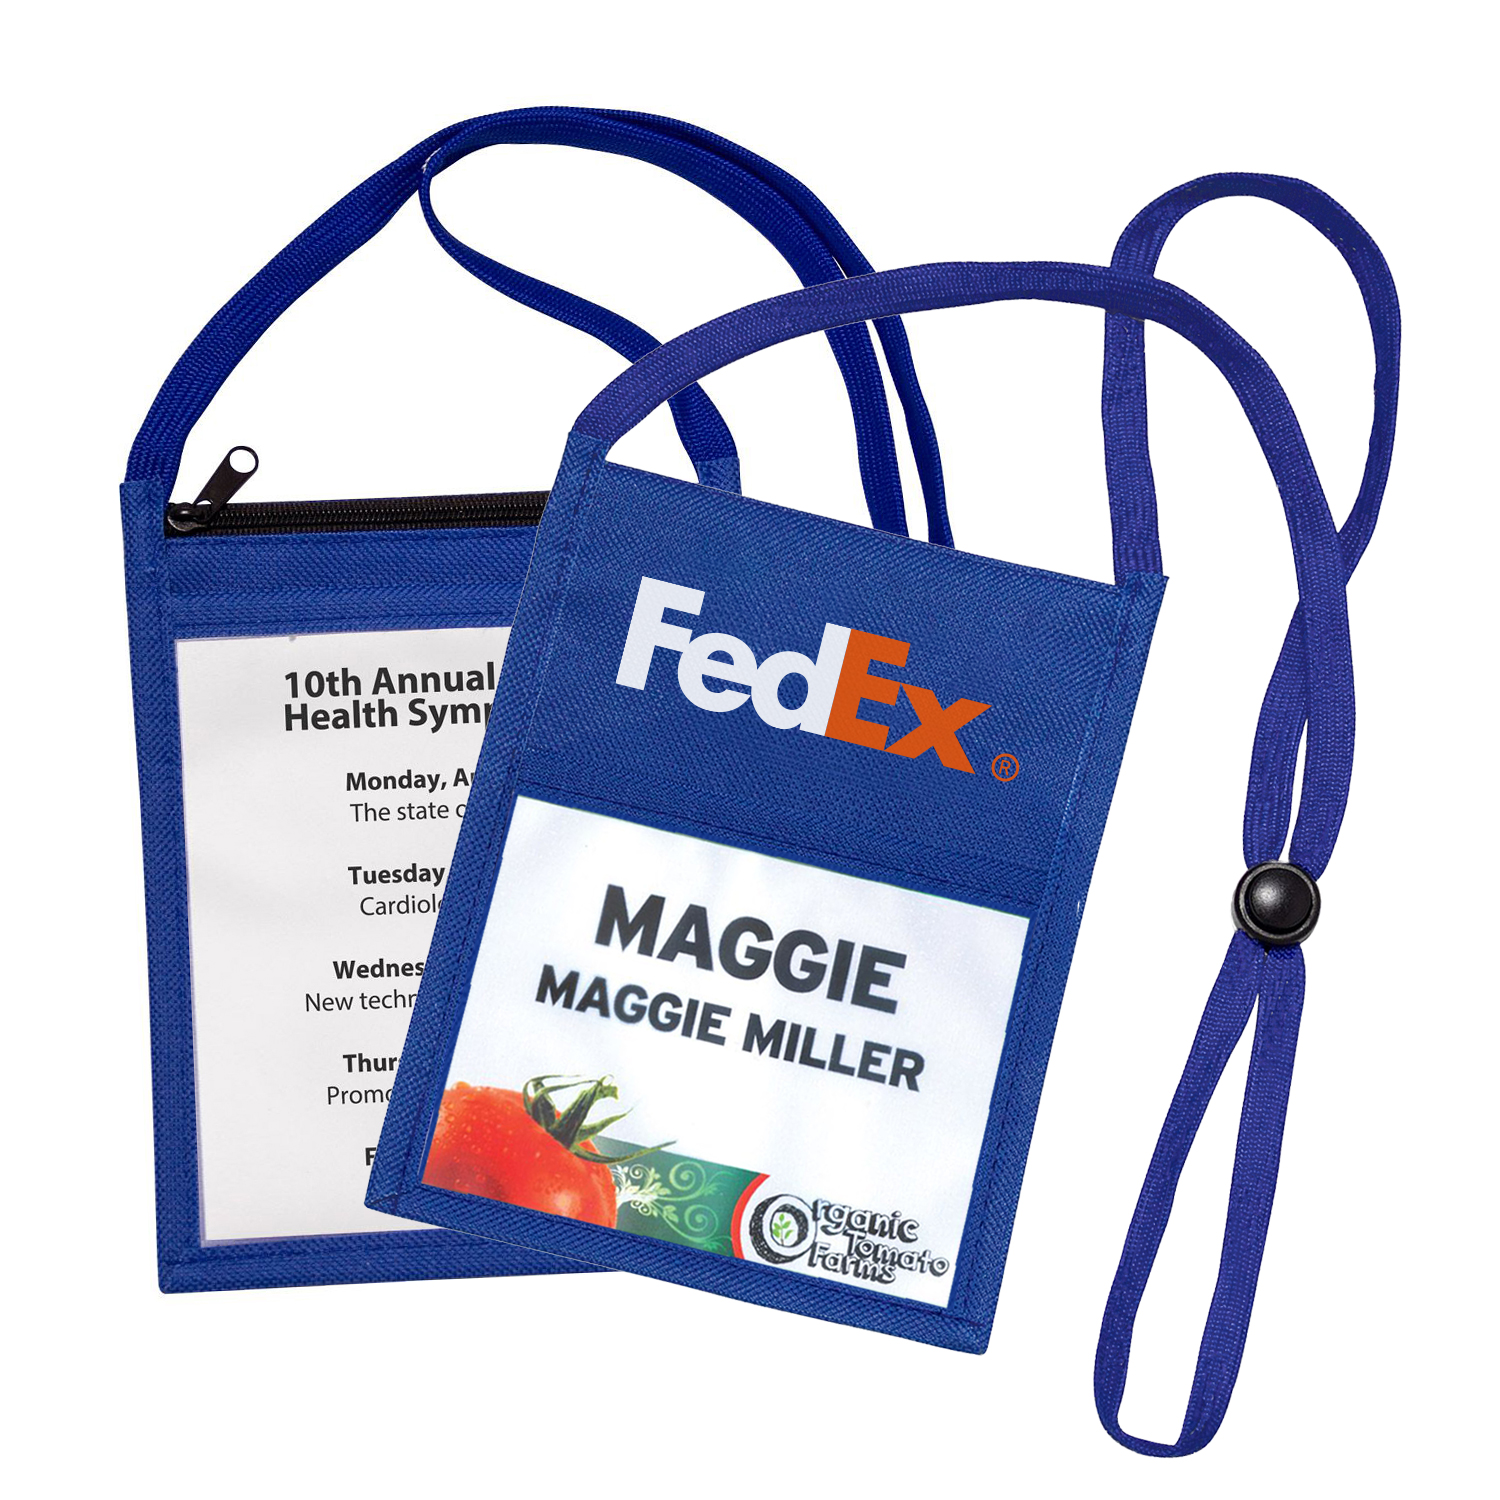 badges, lanyards, and id cards as promotional products